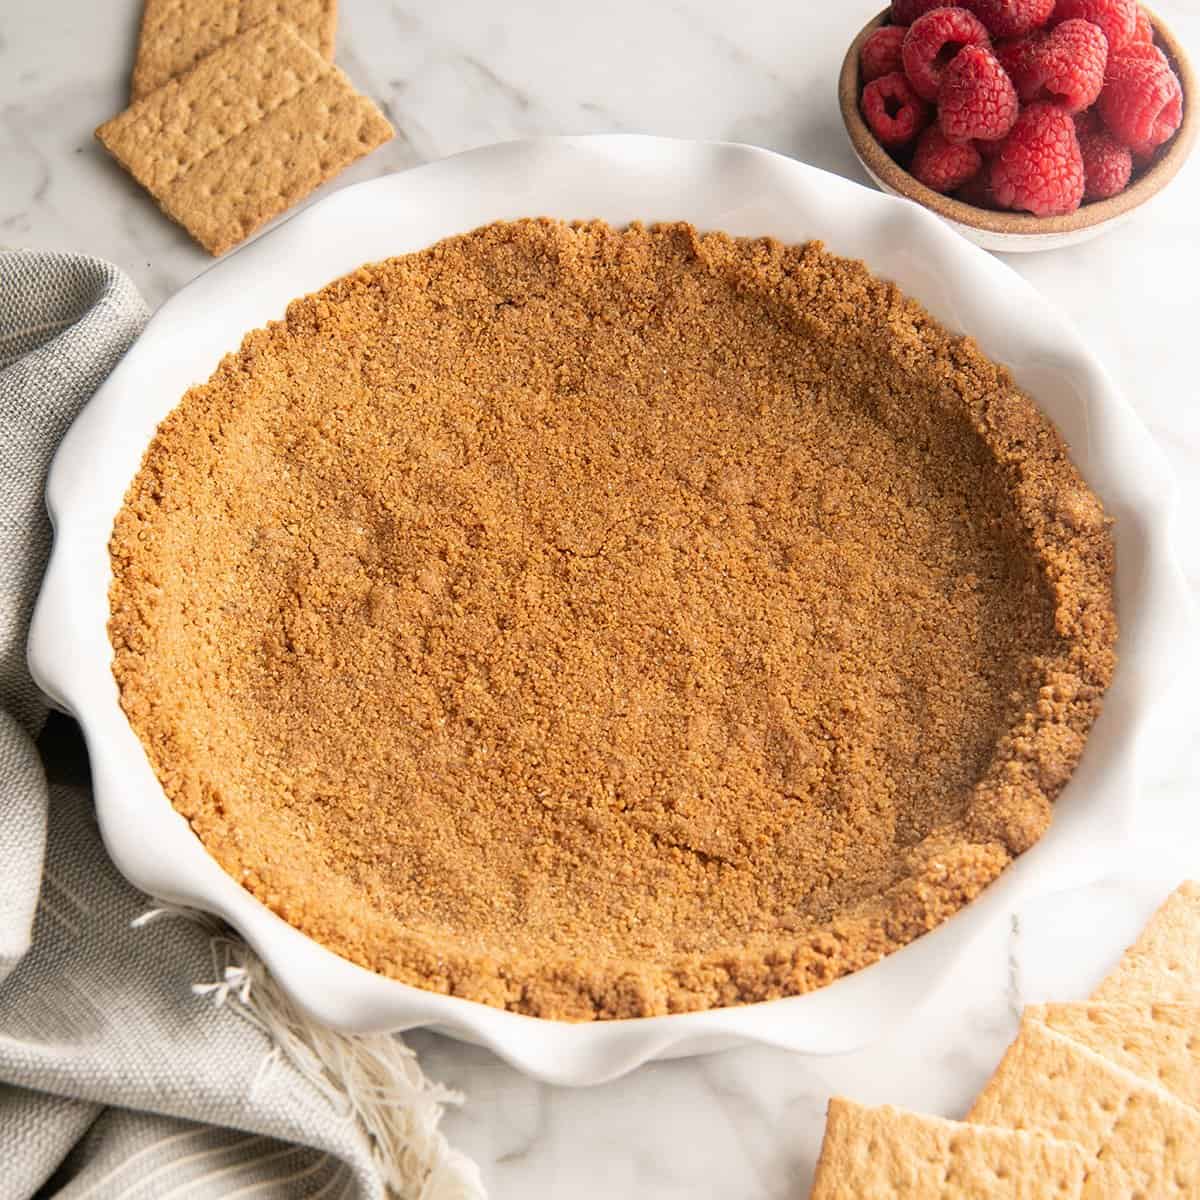 a Peanut Butter Pie Crust in a pie dish to use in this peanut butter pie recipe